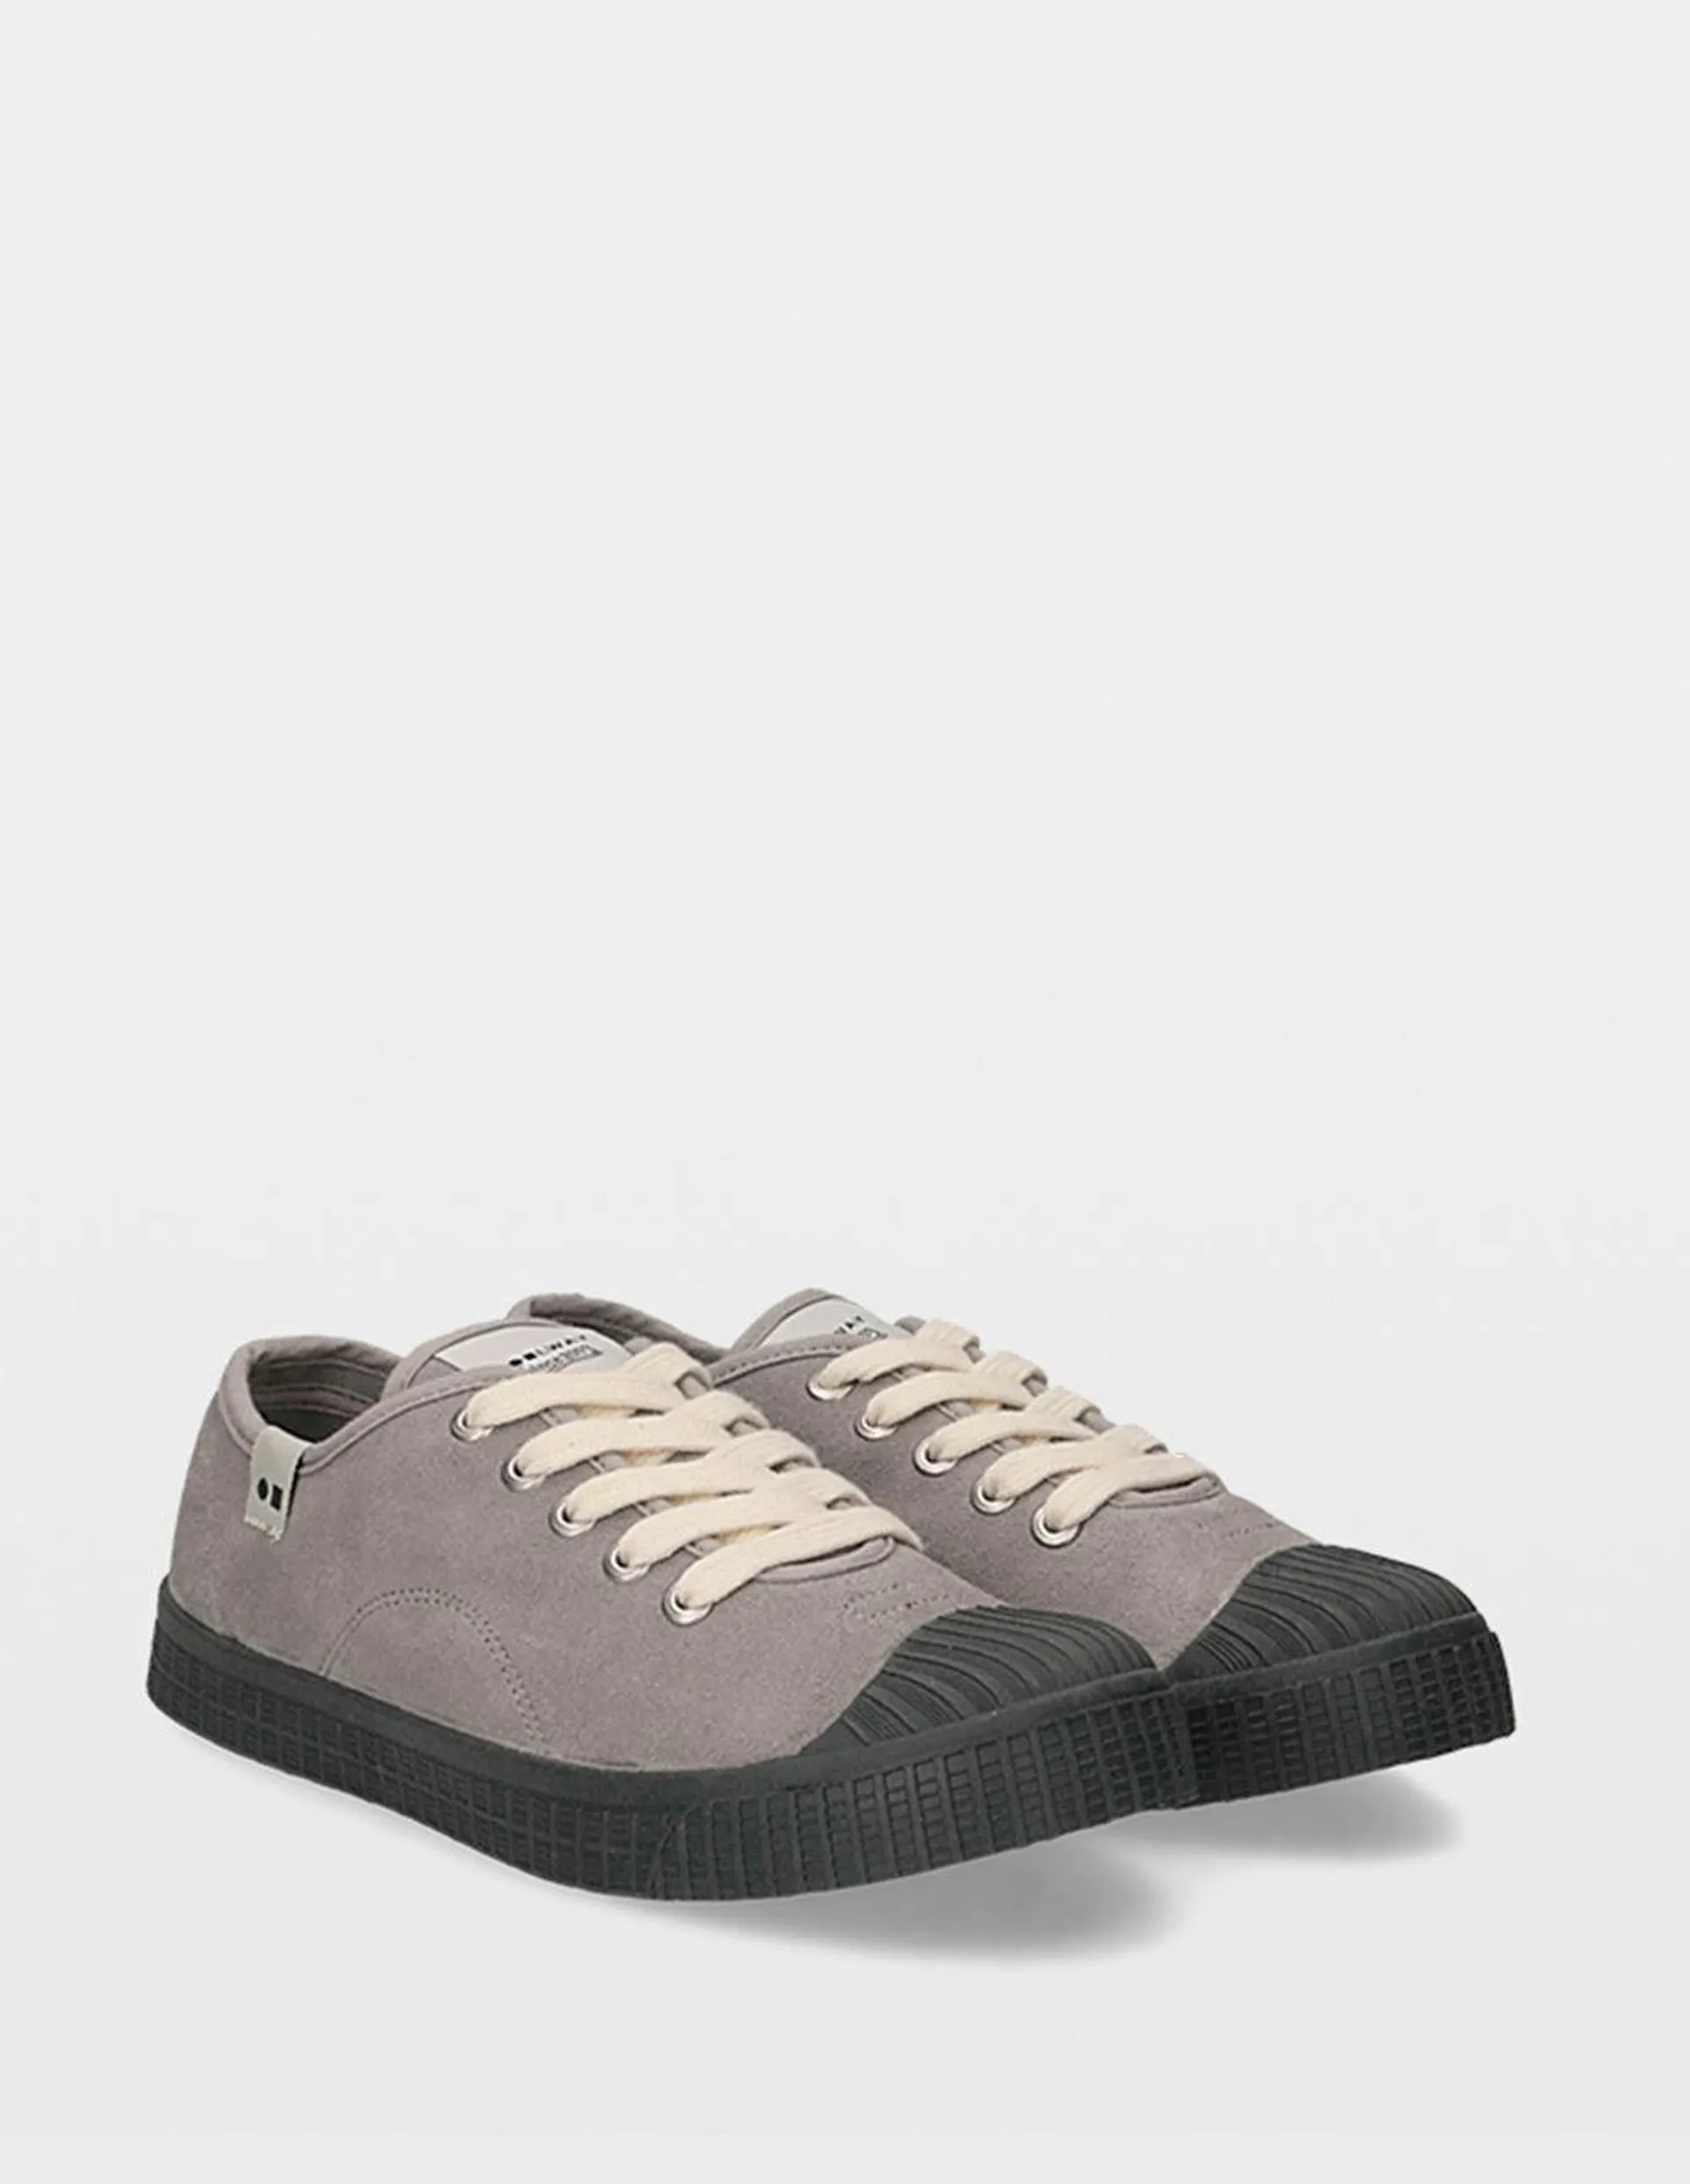 GREENDAY GREY LEATHER HOMBRE